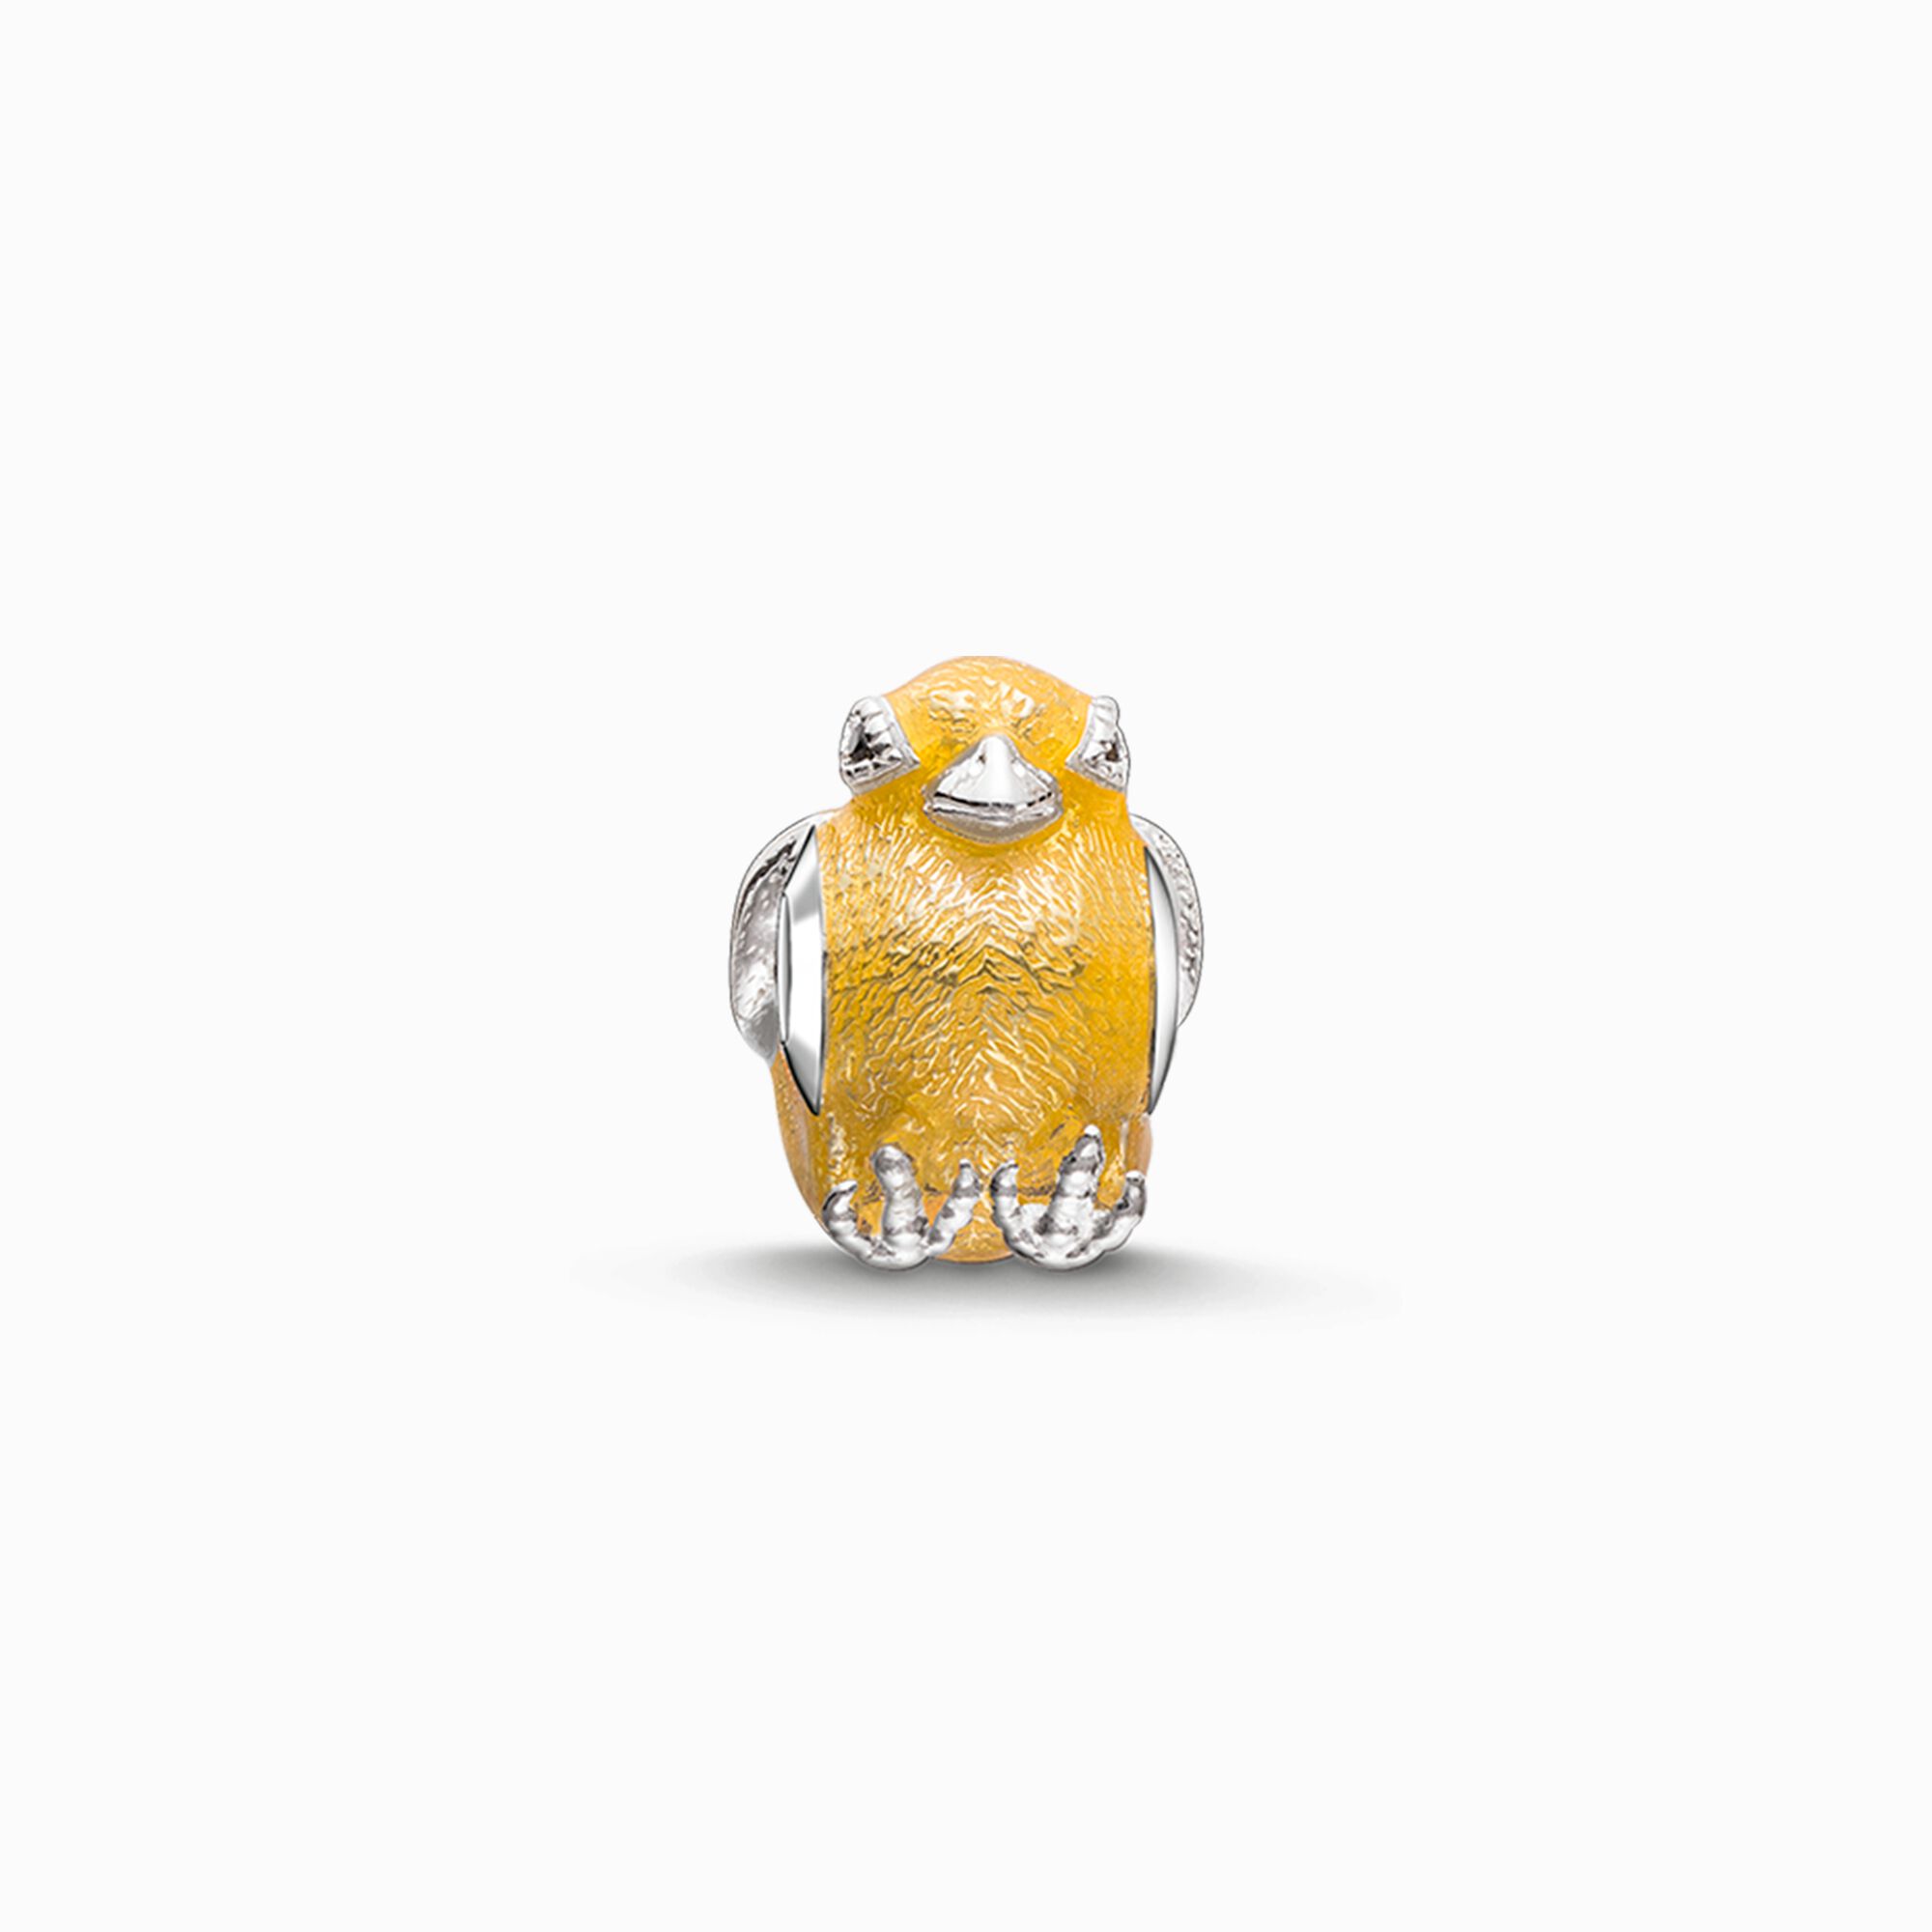 Bead chick from the Karma Beads collection in the THOMAS SABO online store